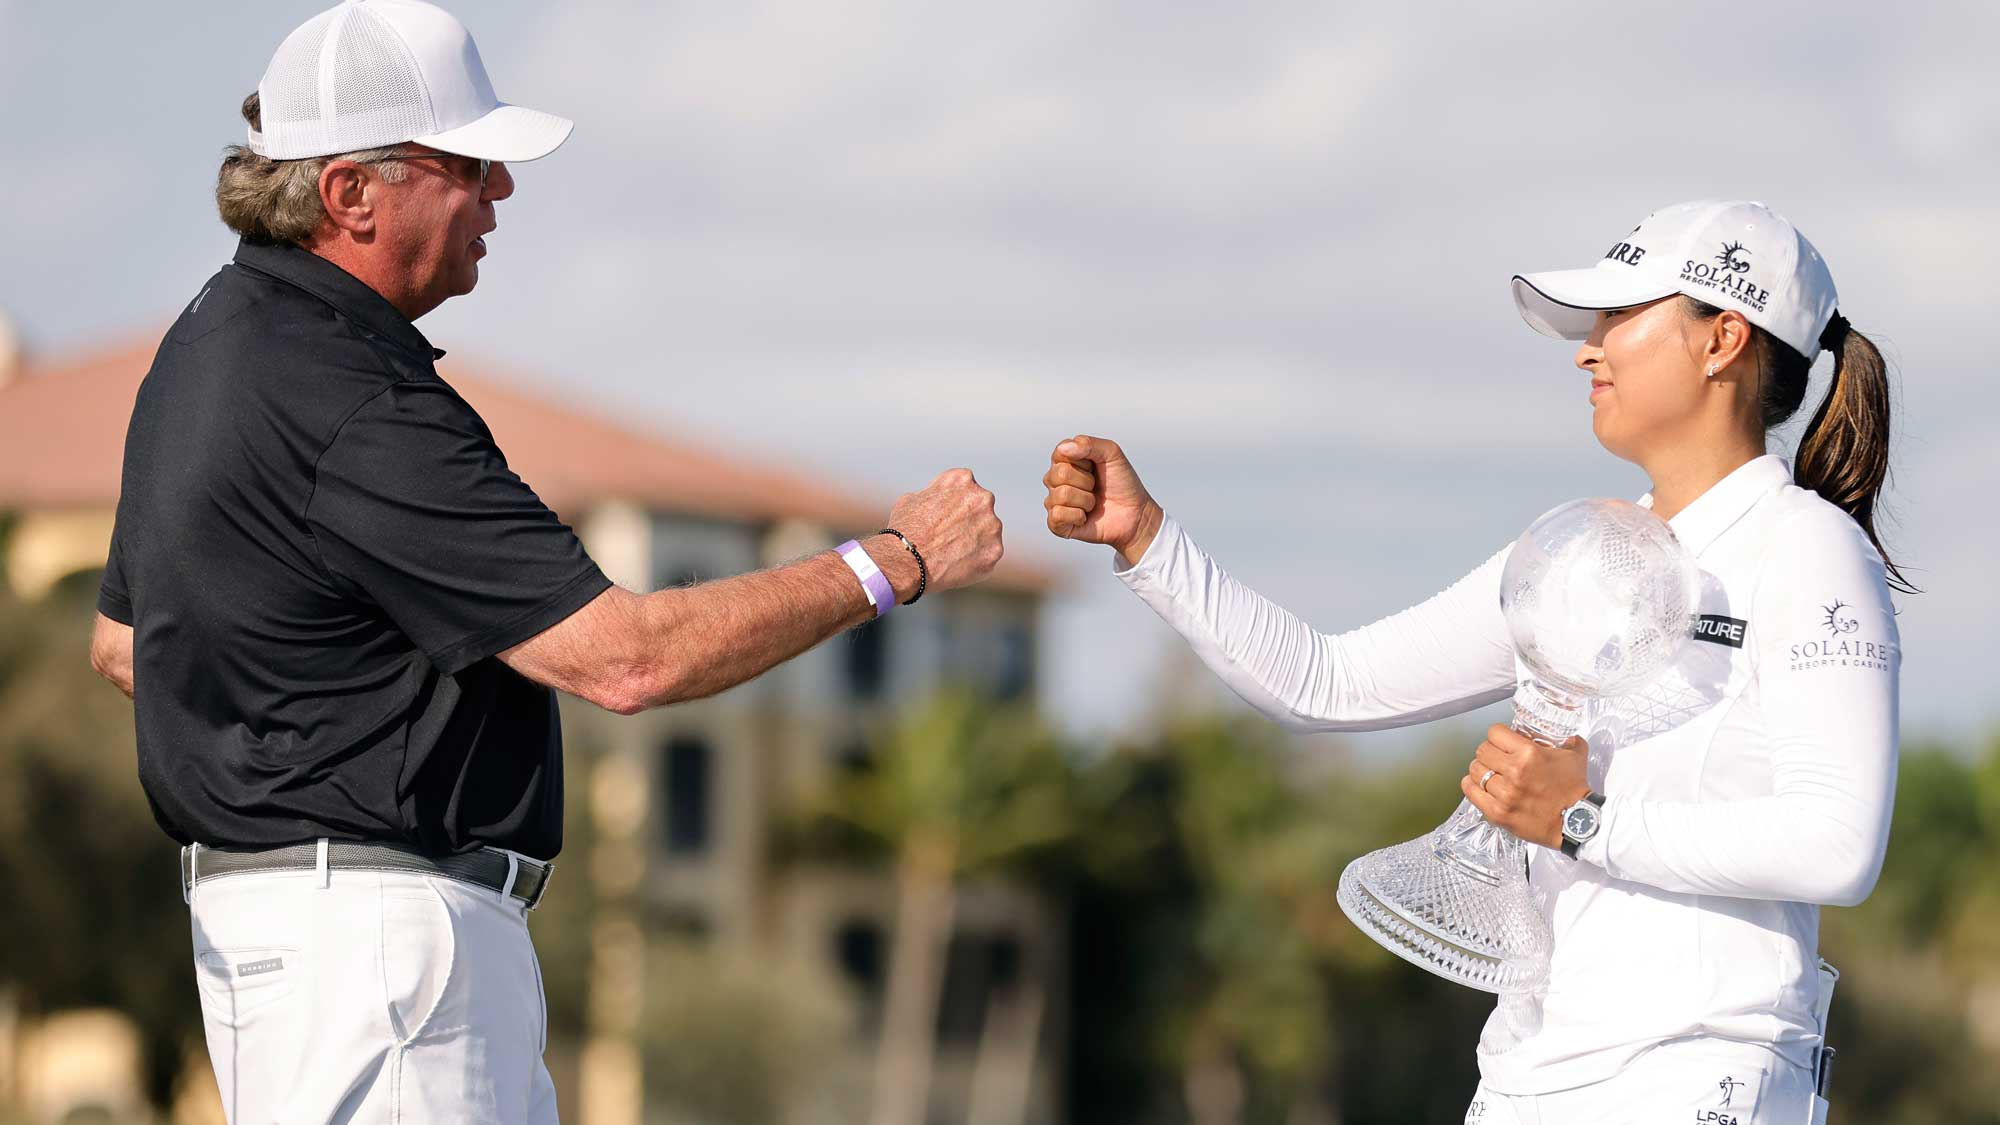 CME Group CEO Terry Duffy (L) fist bumps Jin Young Ko of Korea after she won the CME Group Tour Championship